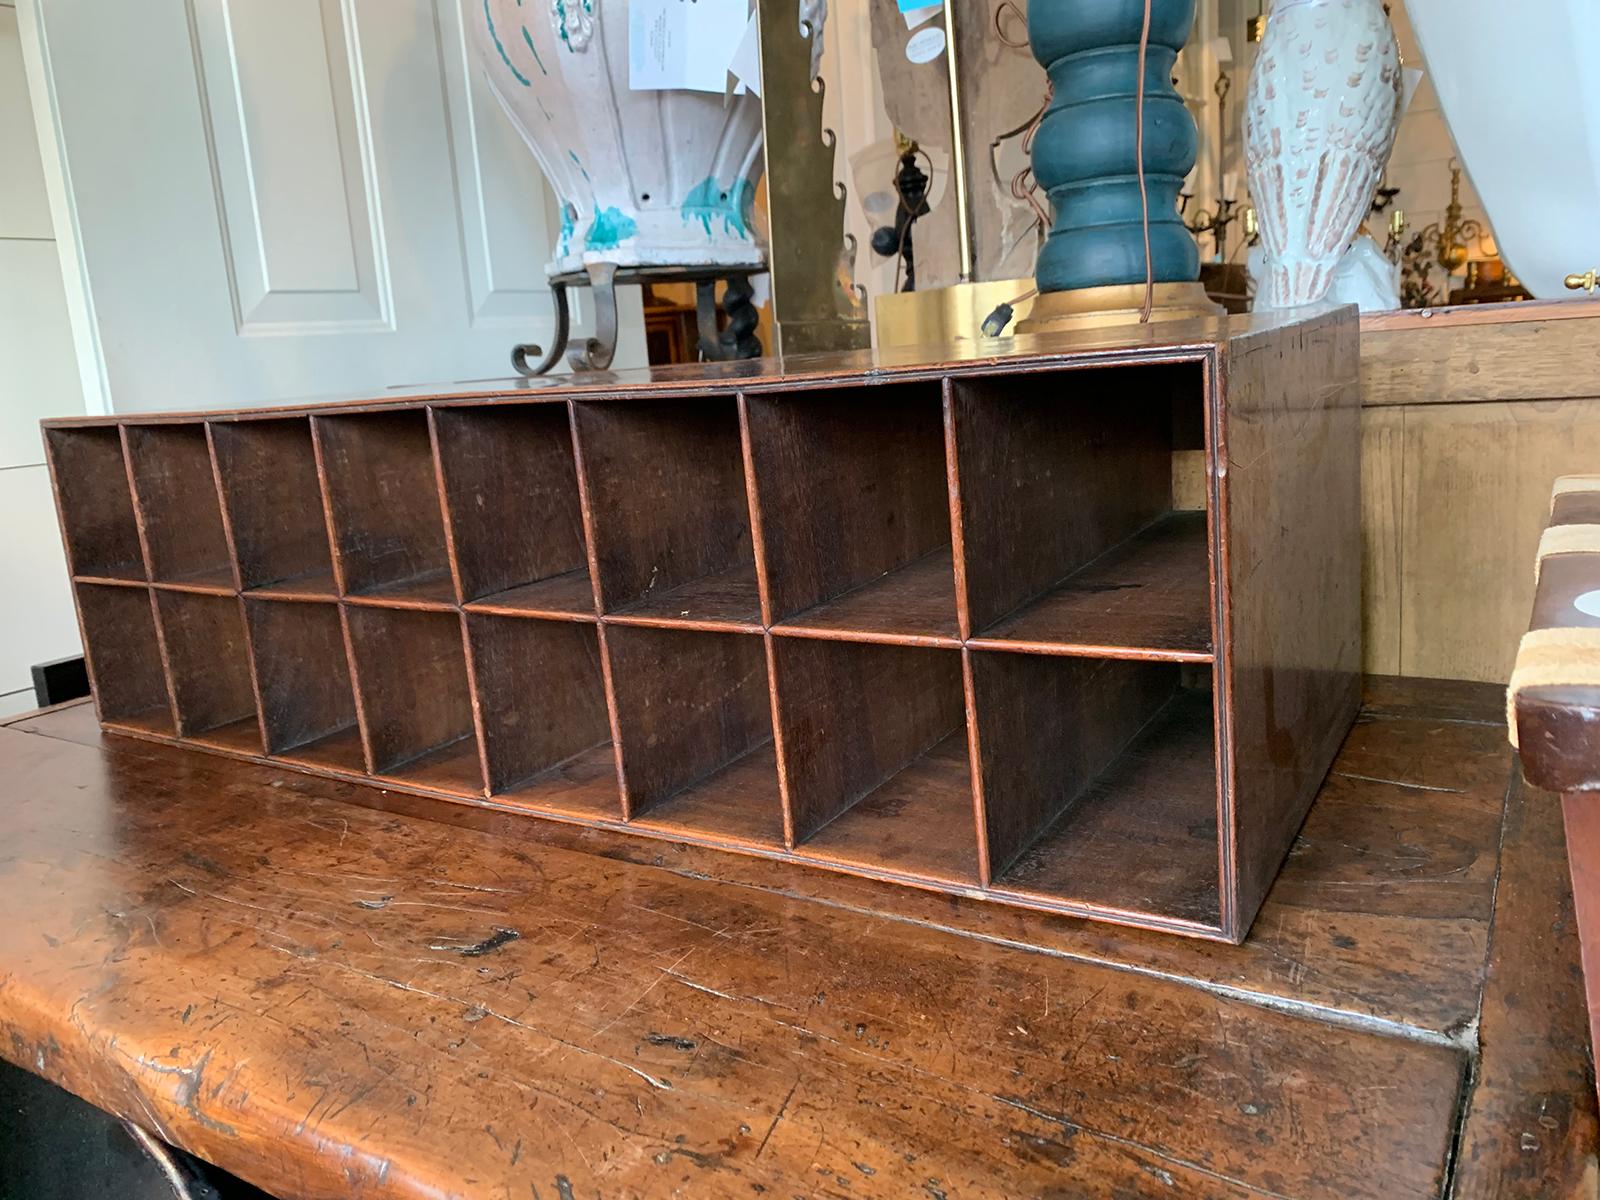 19th century wood organizer with 16 compartments
Beautiful patina
Mailboxes, storage shelves.